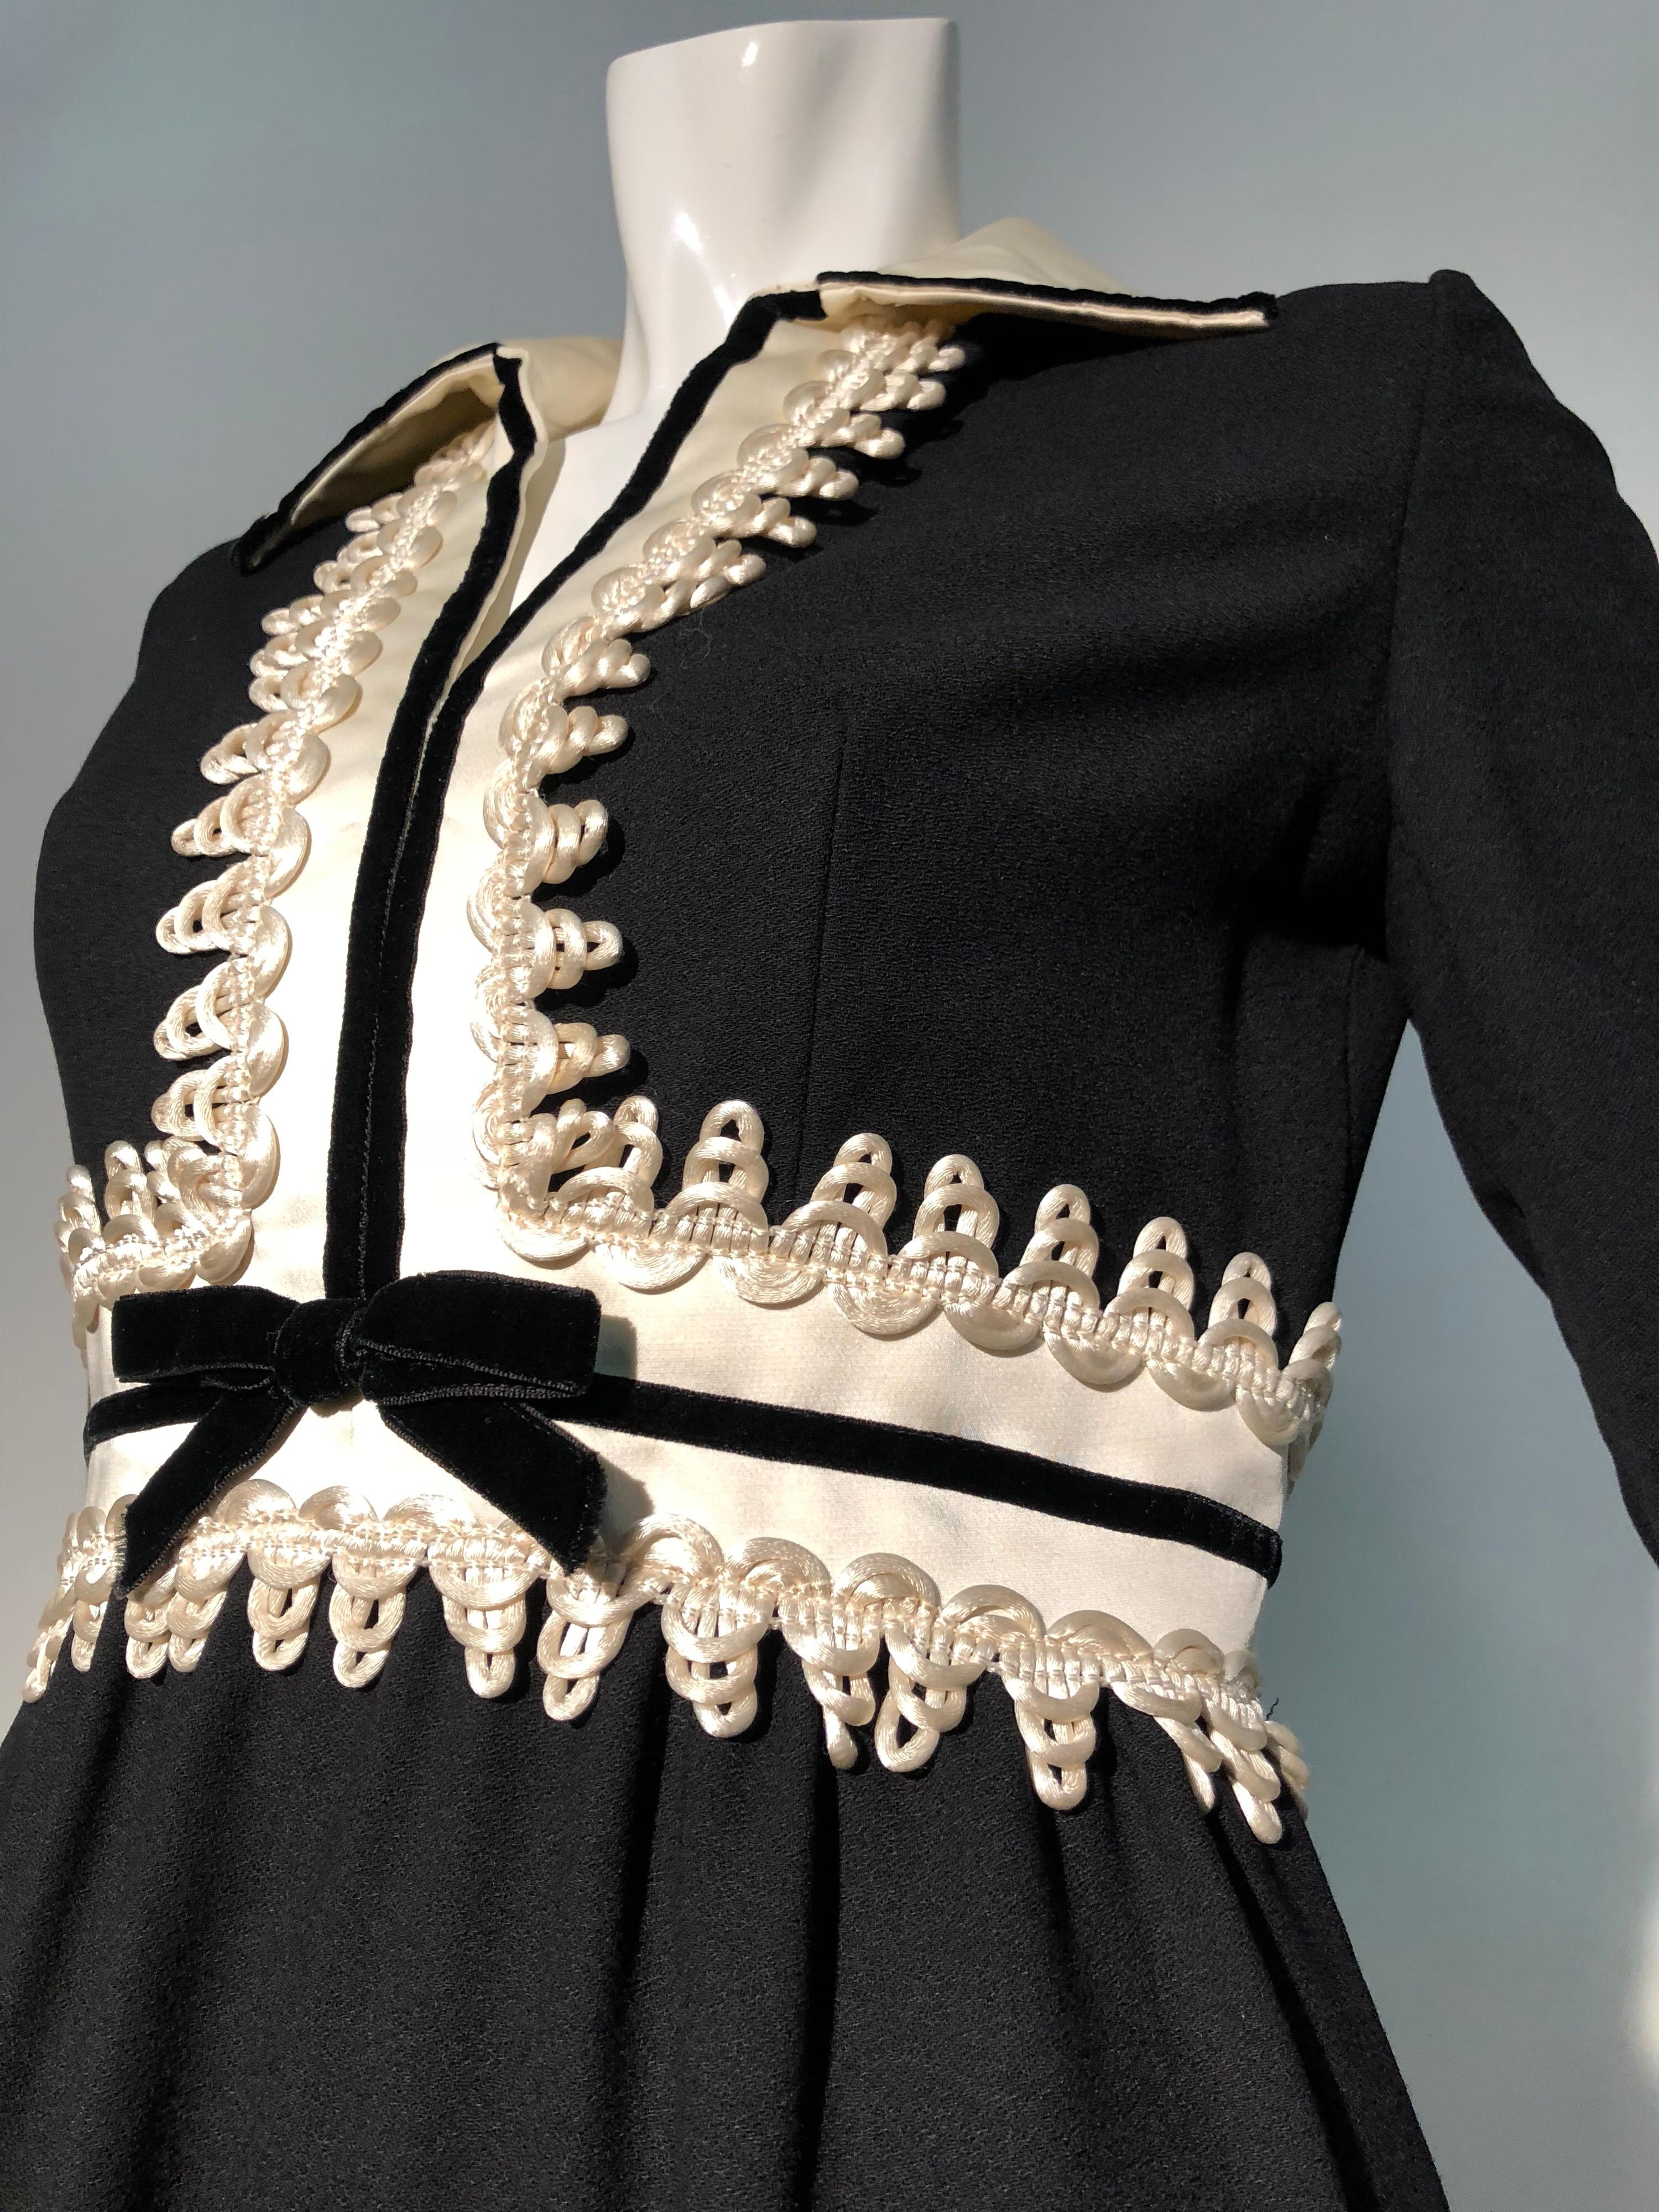 A fabulous 1960s Oscar de La Renta black wool crepe mini dress with fitted, inset white waistband and neckline. Neckline is embellished with ivory satin cord looped passimentery trim and a thin black velvet ribbon bow. Open collar. Back zipper. Side